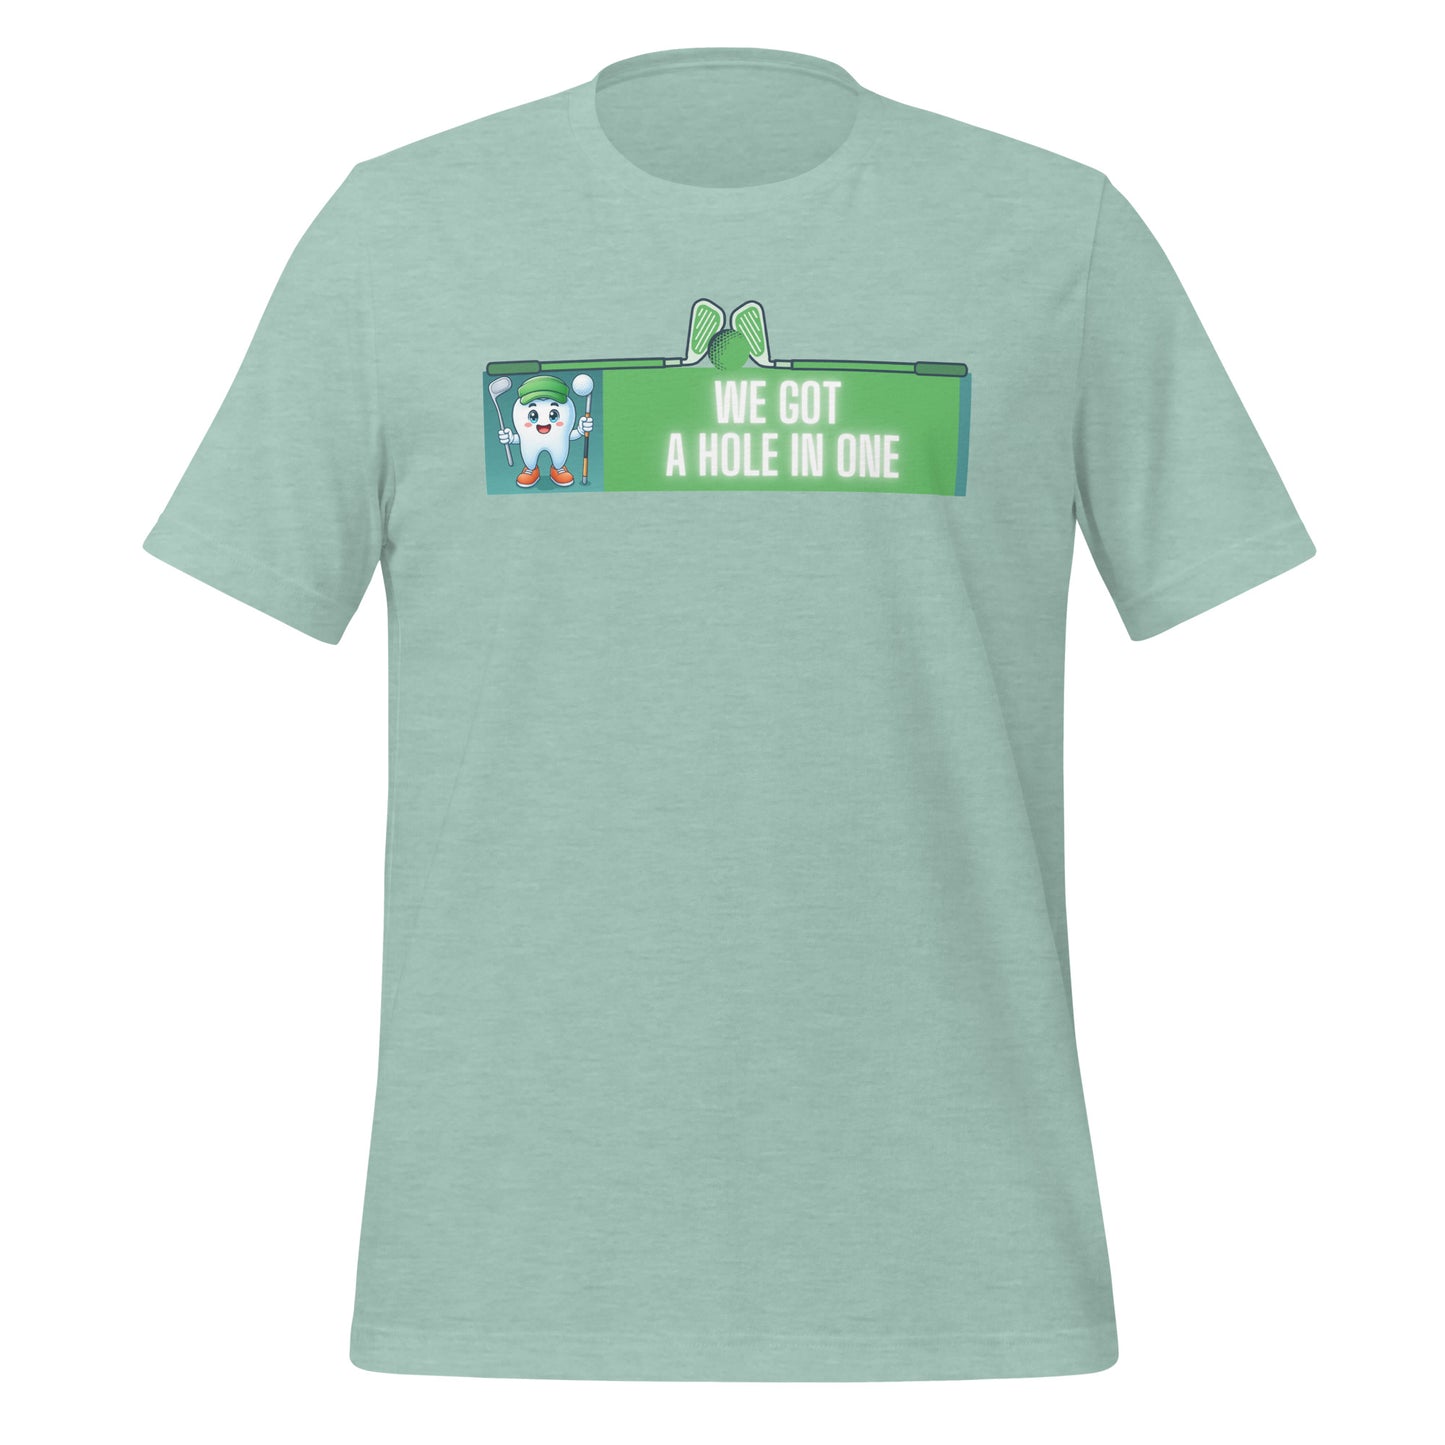 Cute dentist t-shirt showcasing an adorable tooth character in golf attire, joyfully celebrating a ‘hole in one’ achievement, perfect for dentist and dental professionals seeking unique and thematic dental apparel. Heather prism dusty blue color, front view.